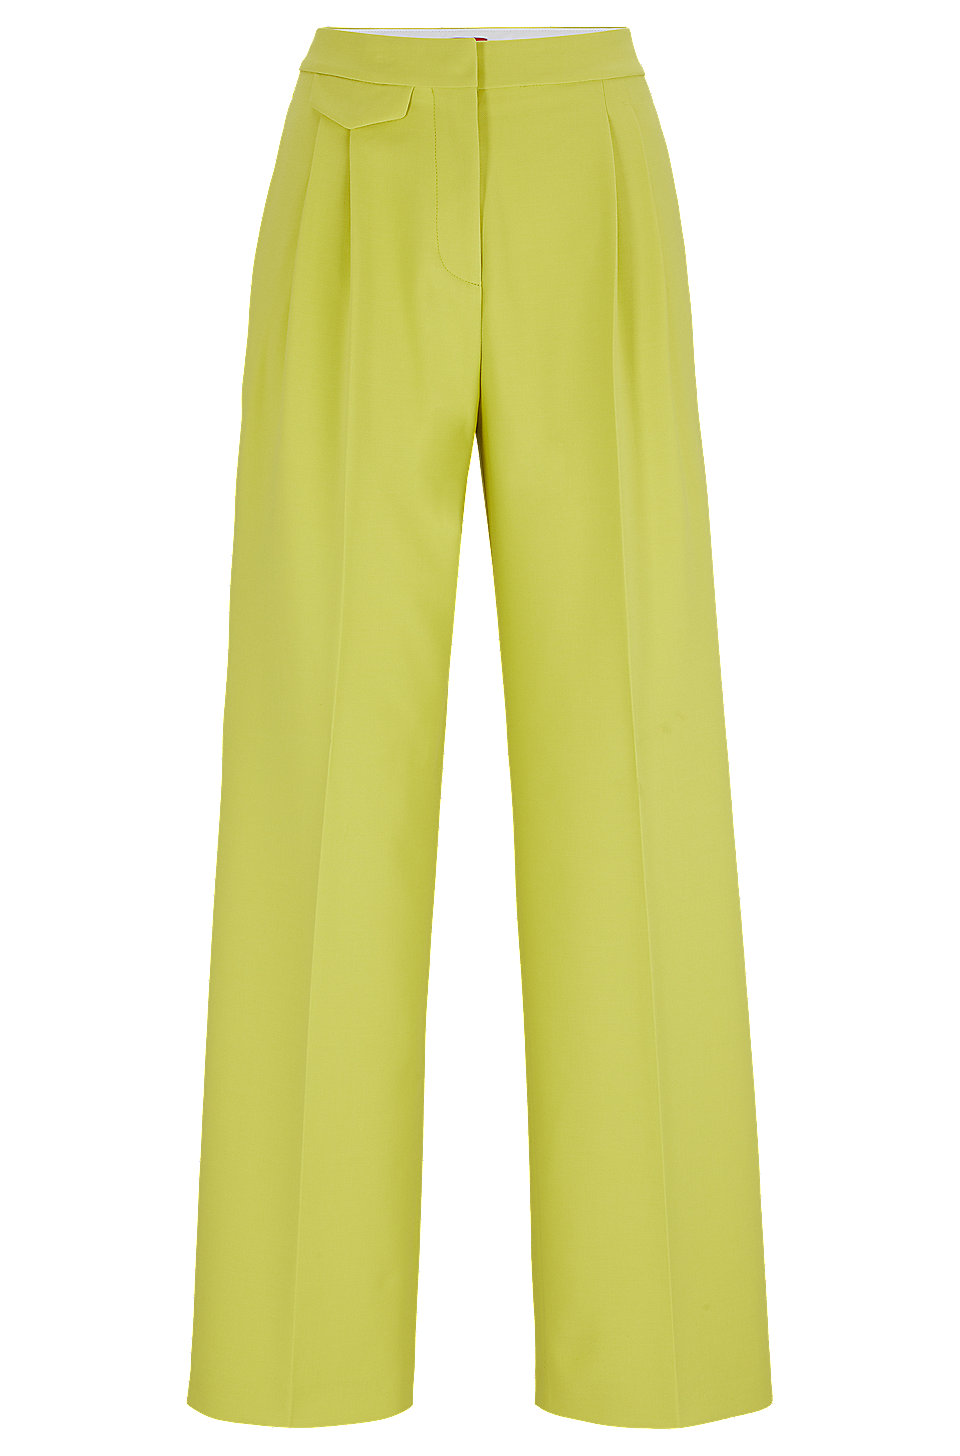 HUGO - Relaxed-fit trousers in stretch fabric with front pleats